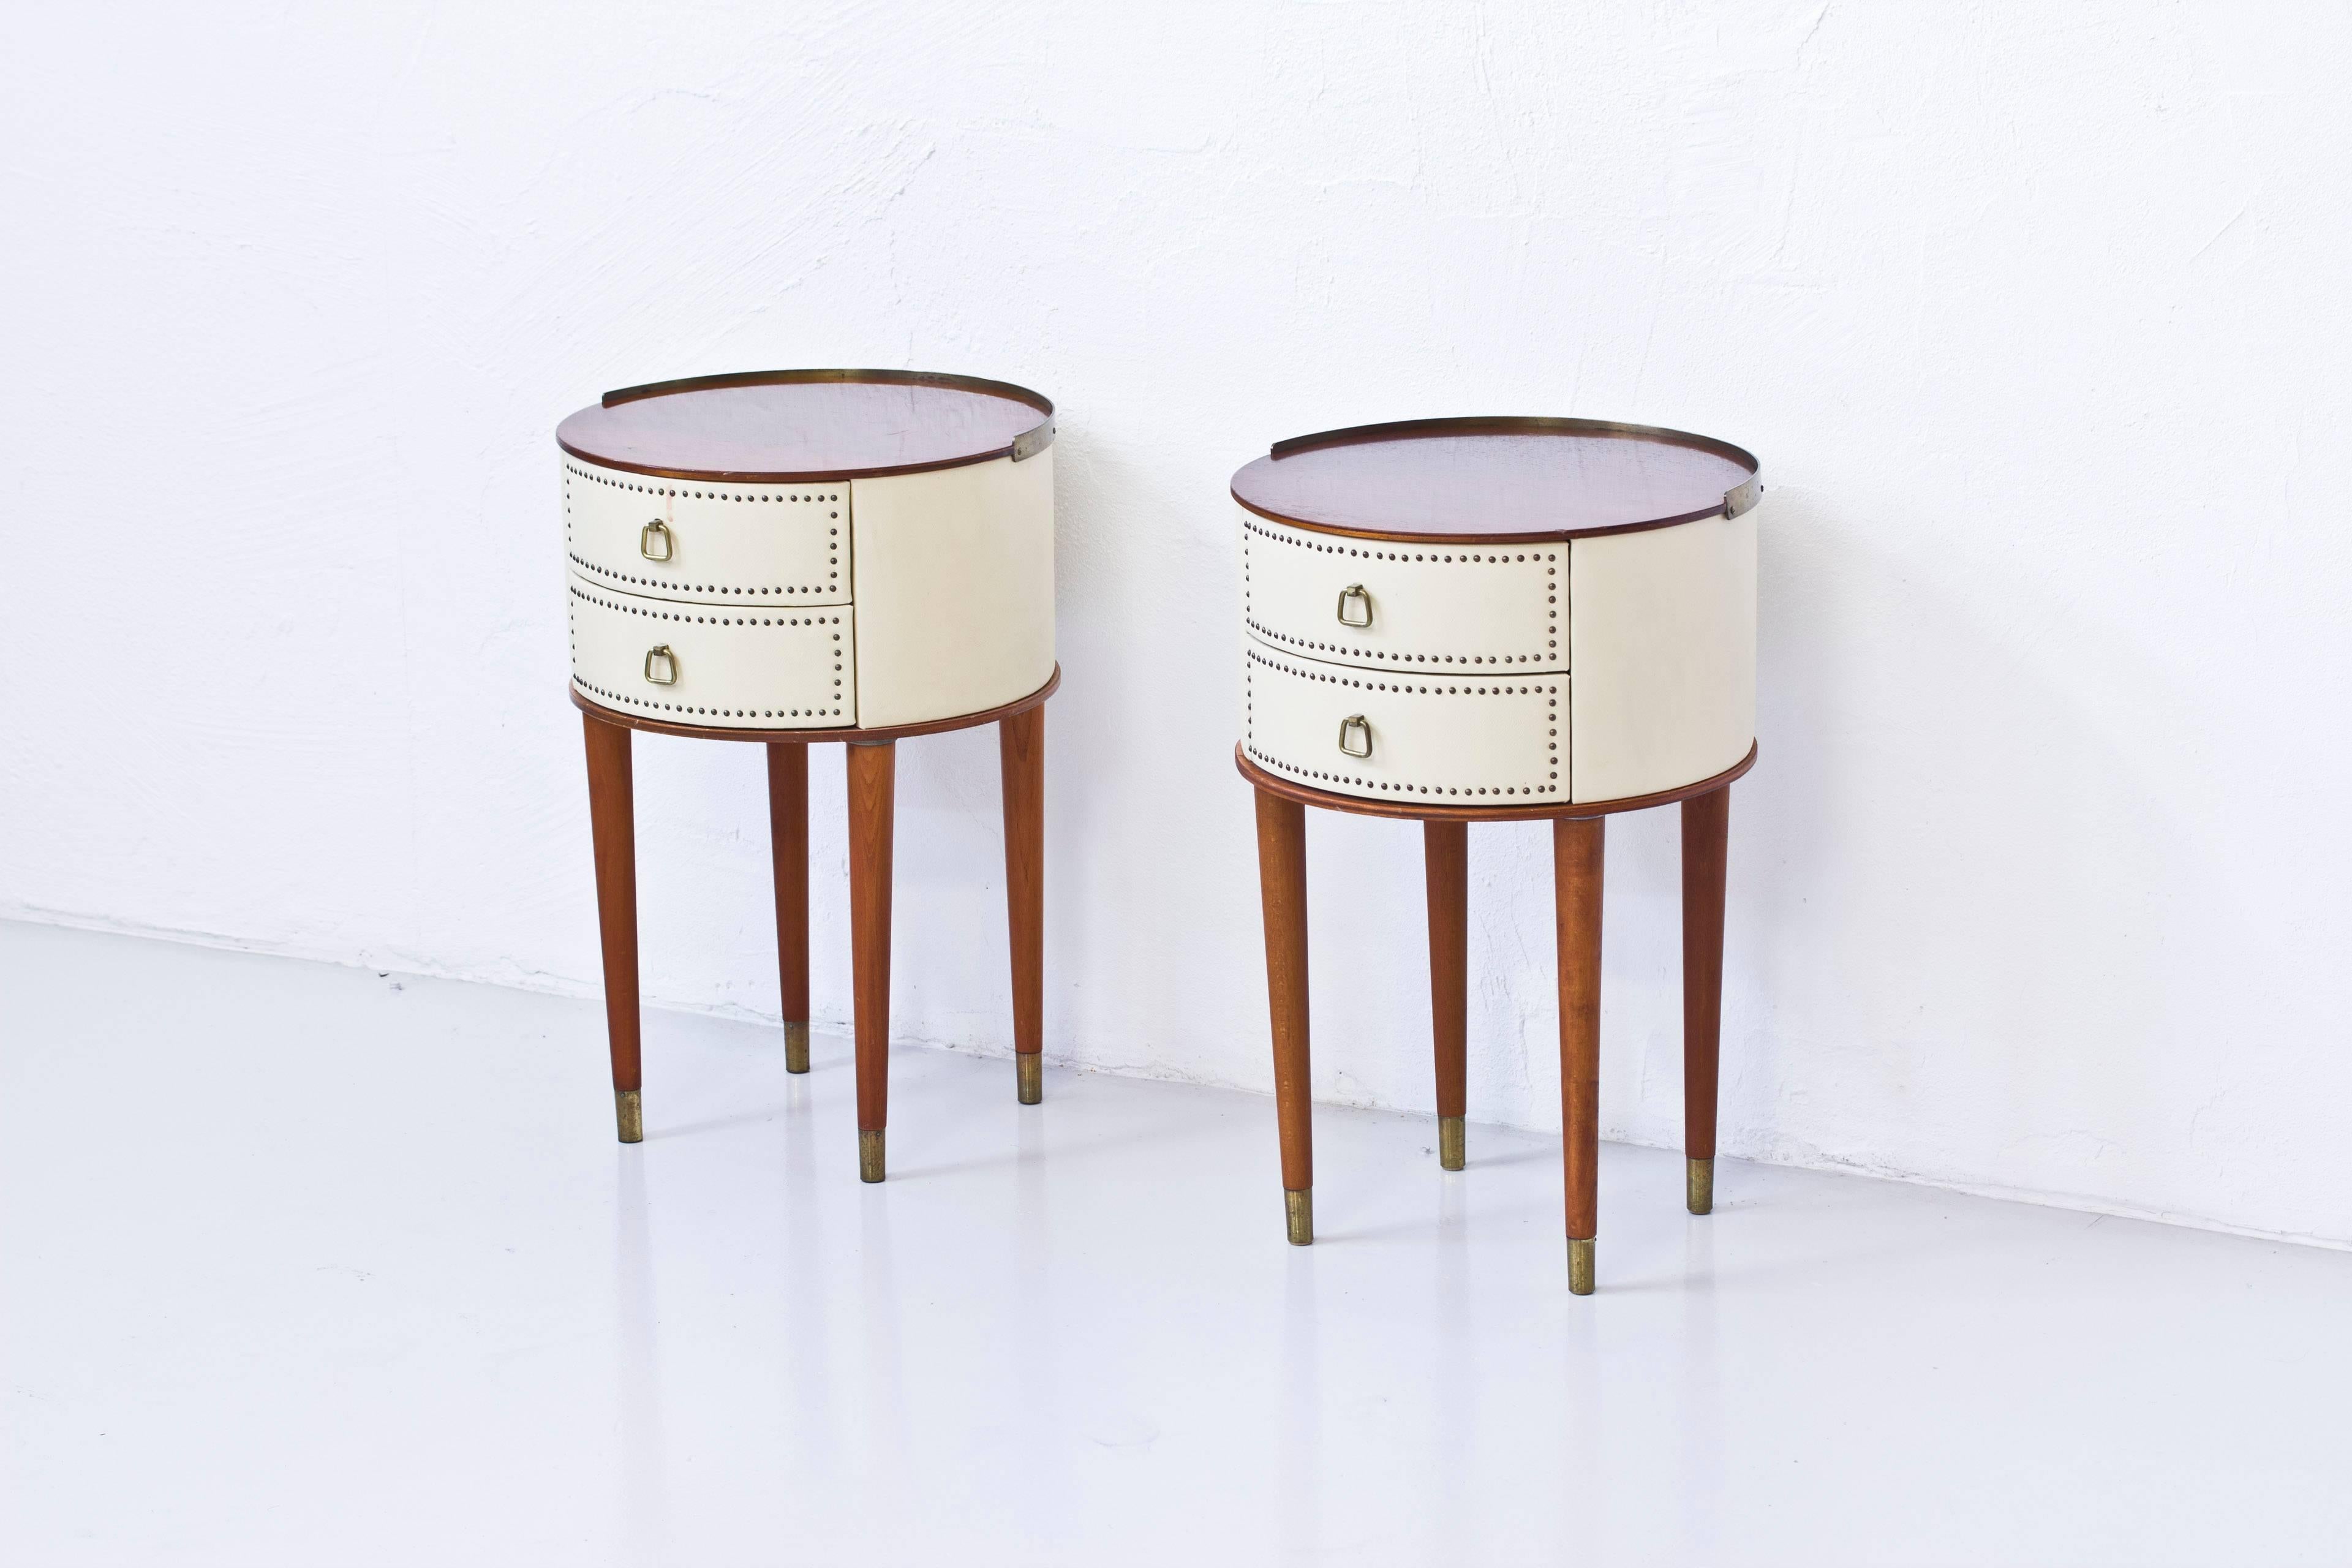 Nightstands designed by Halvdan Pettersson. Produced by his own company in Tibro Sweden during the 1950s. Round wooden cabinets with faux leather, mahogany tabletops and beech legs. Rounded brass edging on the tabletop and brass pulls on the drawers